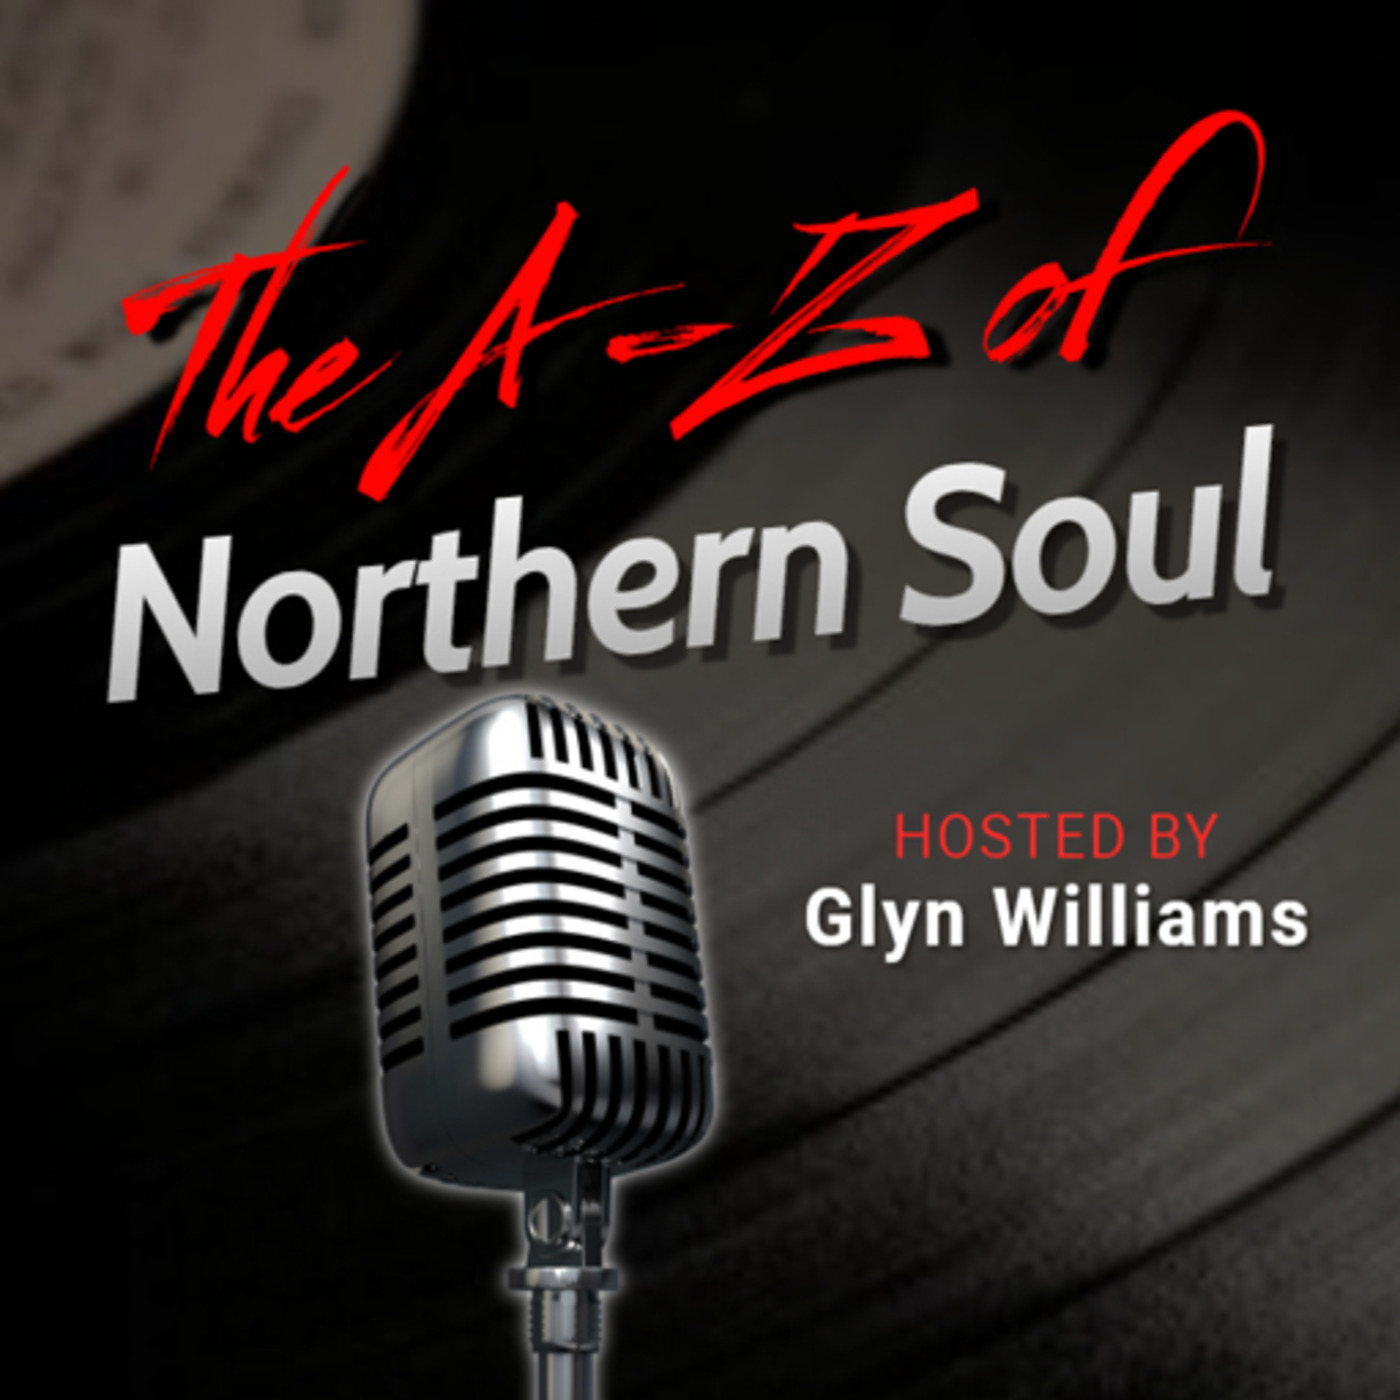 The A-Z of Northern Soul E076